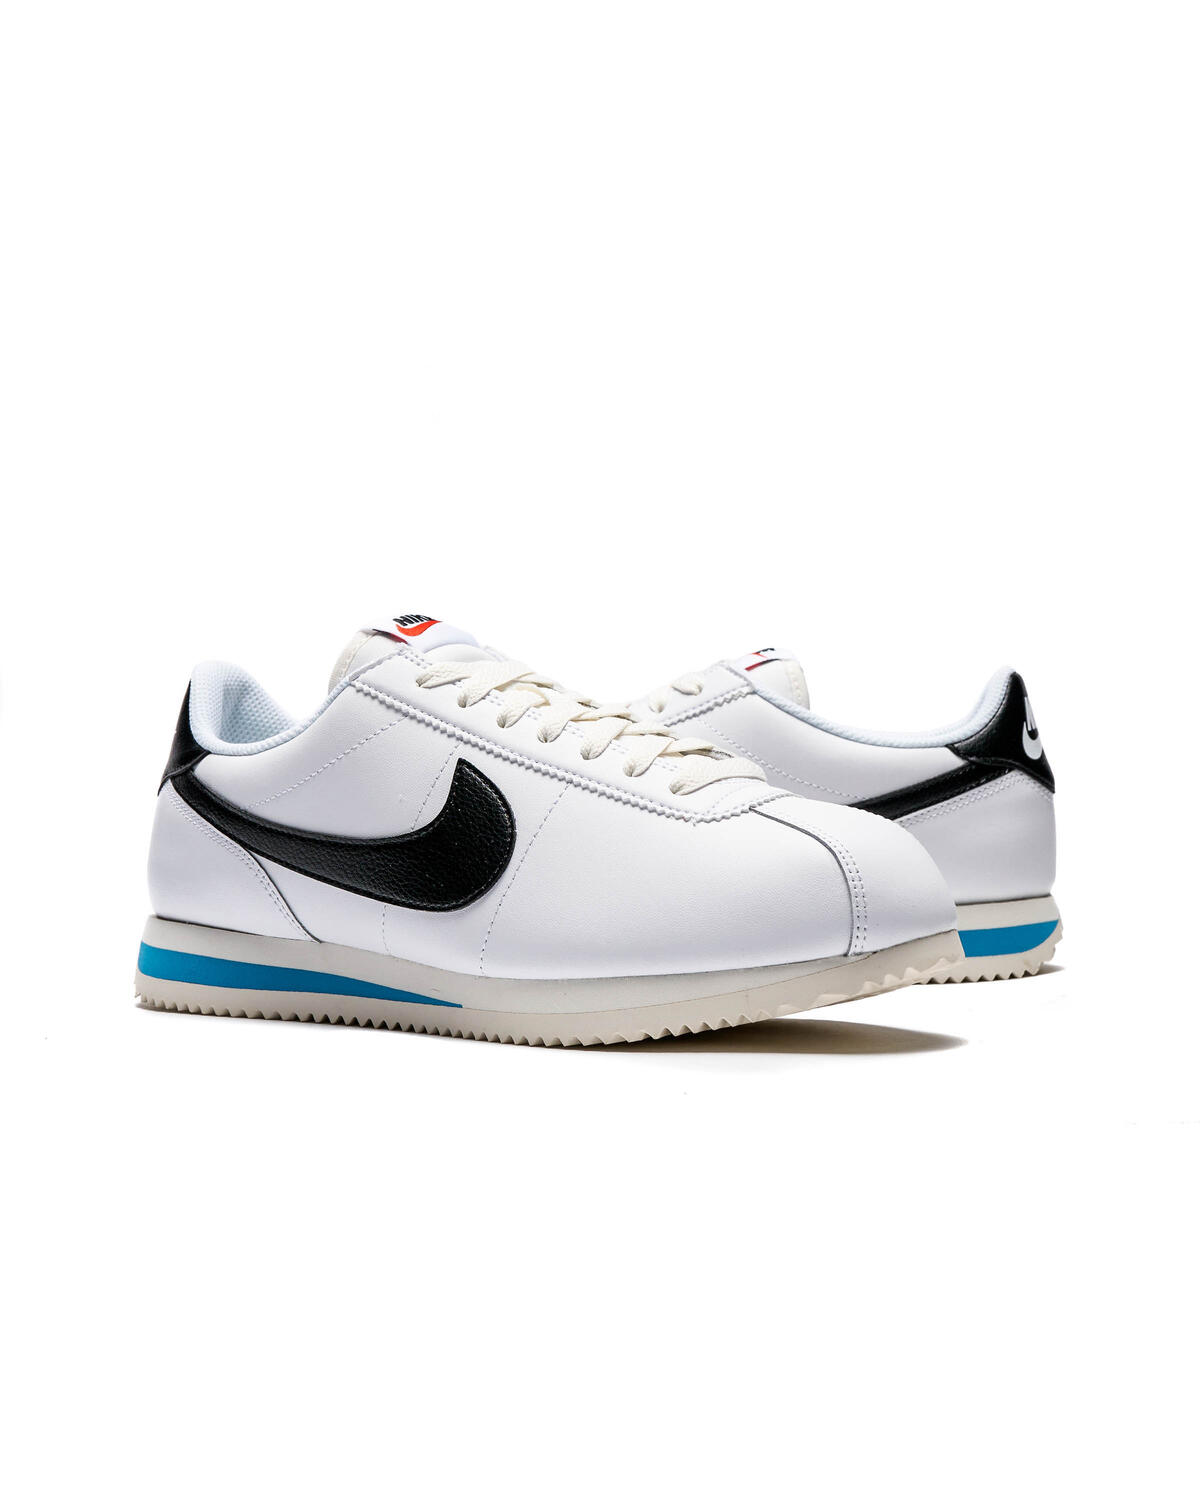 ABC & Co. - Nike Cortez in Smokey Mauve for only P3,100!